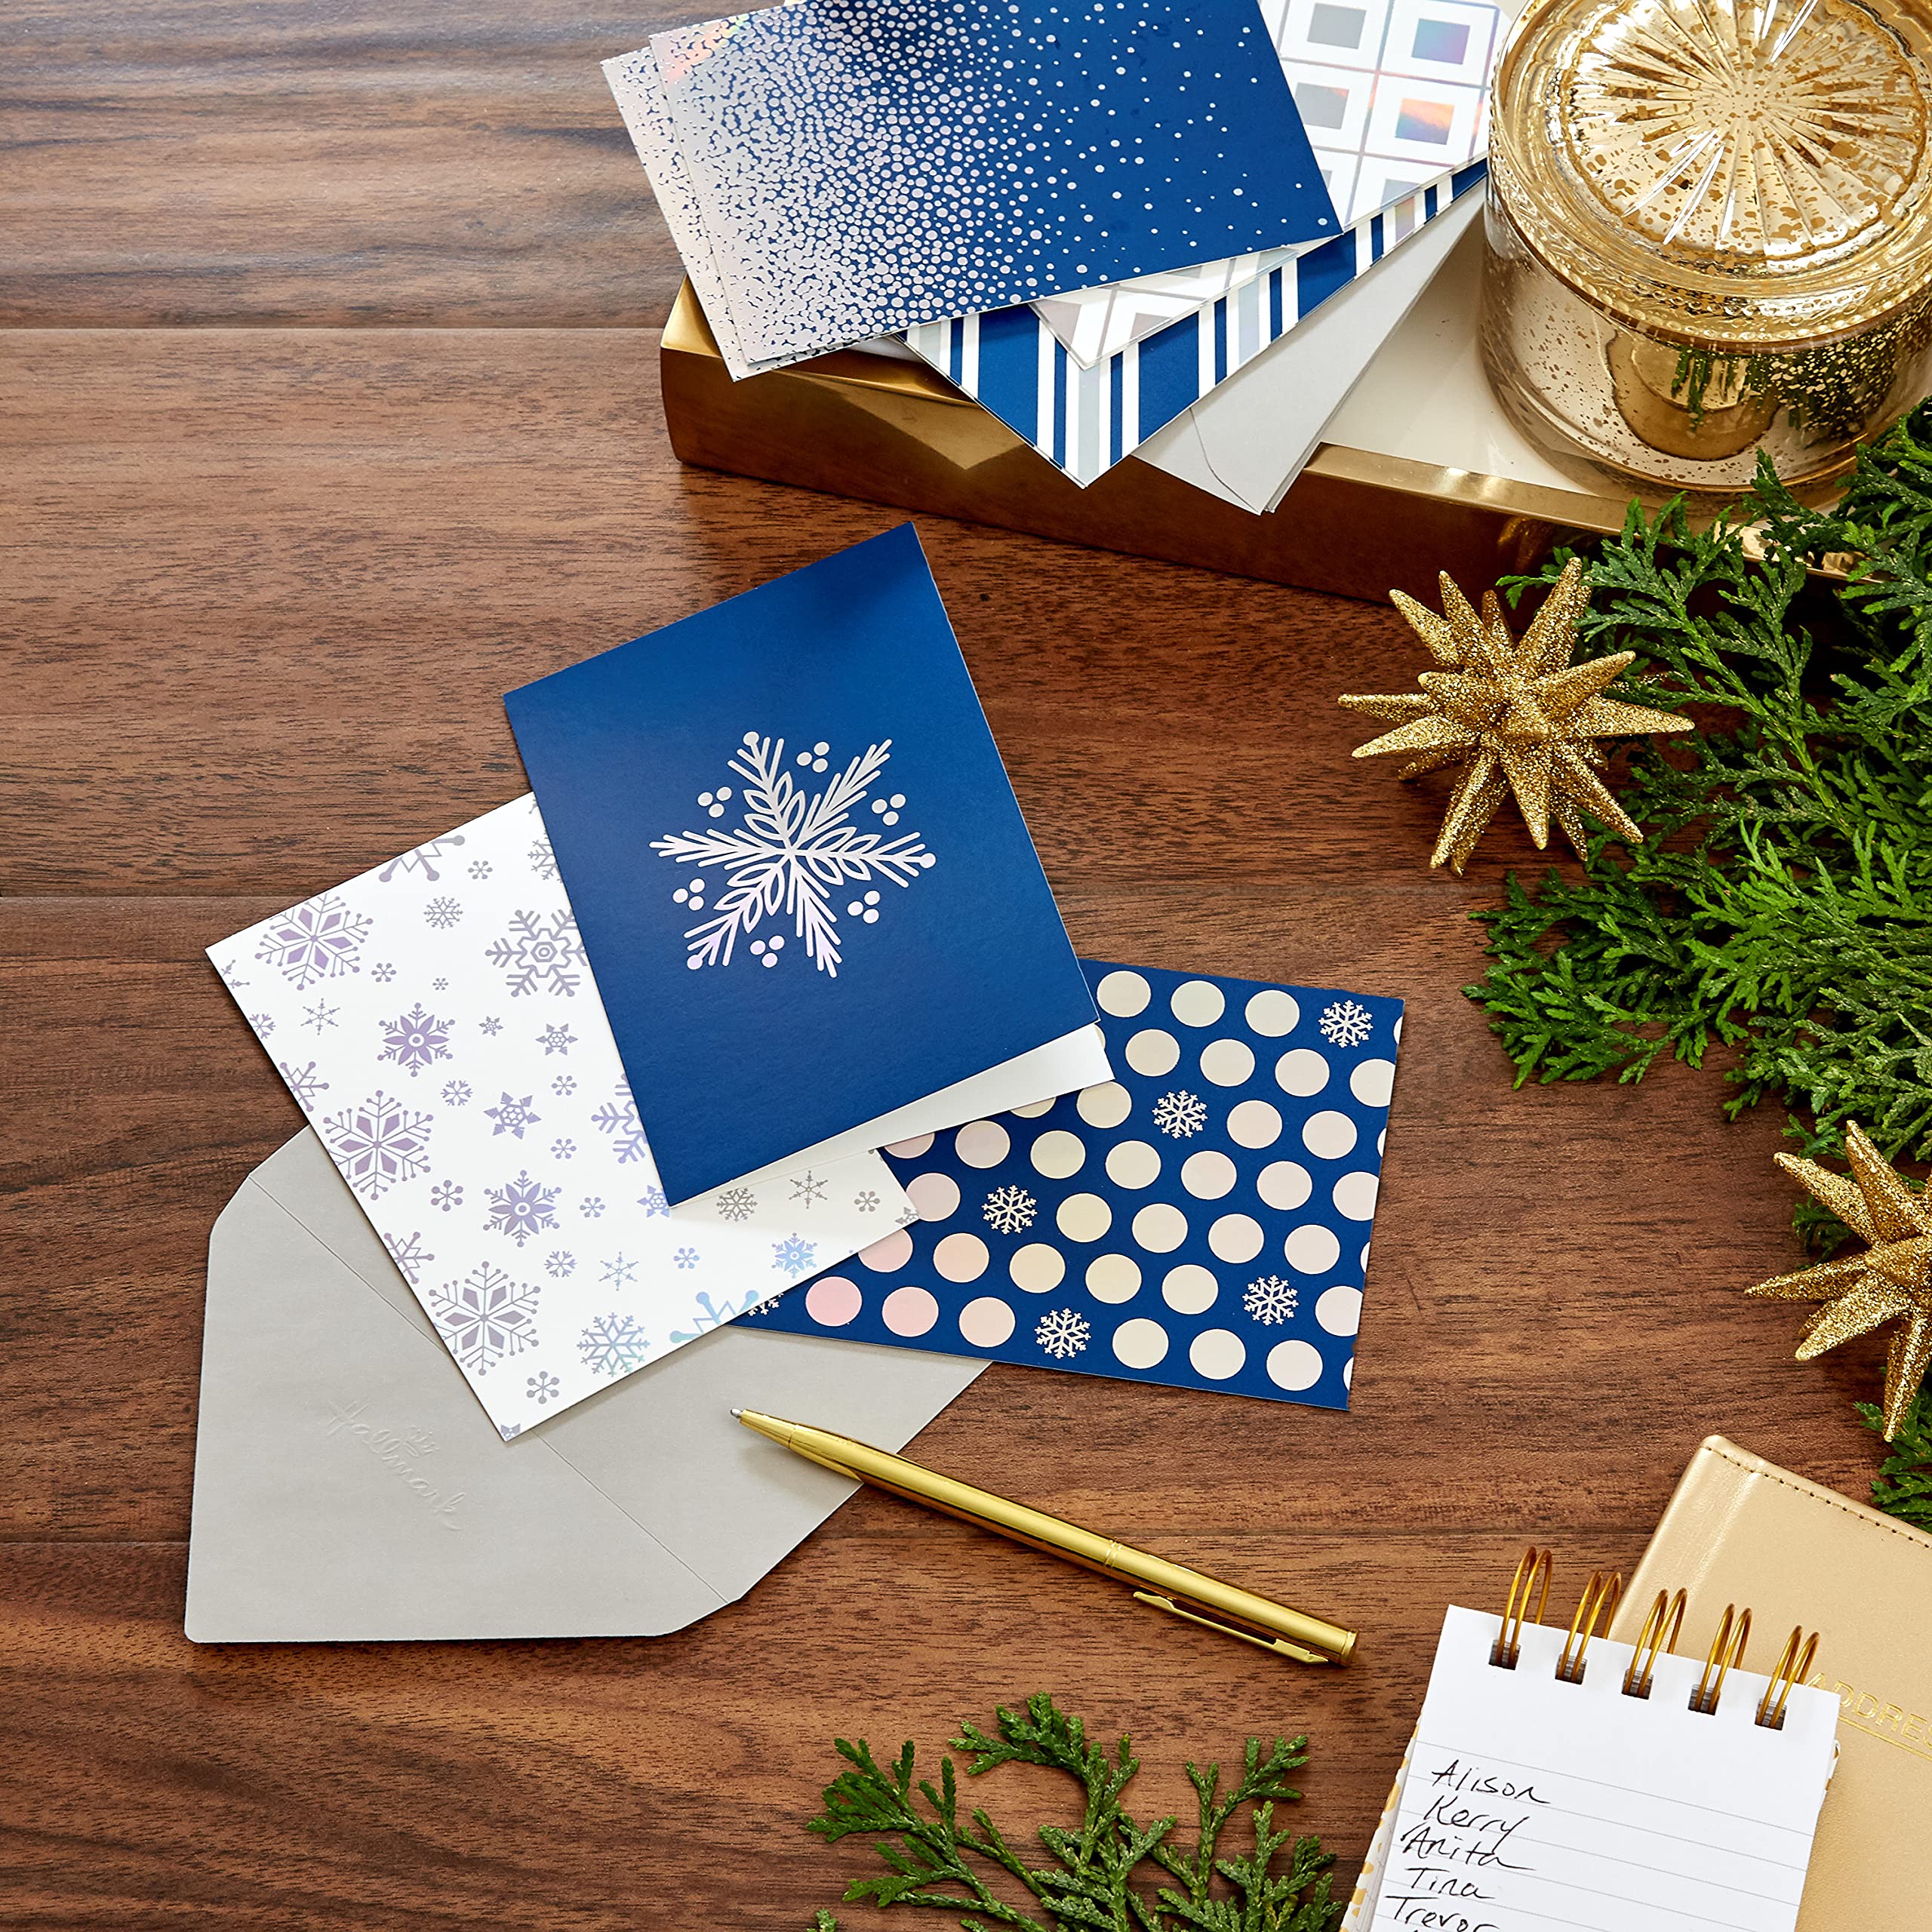 Hallmark Blank Cards, Boxed Holiday Cards Assortment (Snowflakes, 24 Cards and Envelopes),Blue Designs,5CZE1036